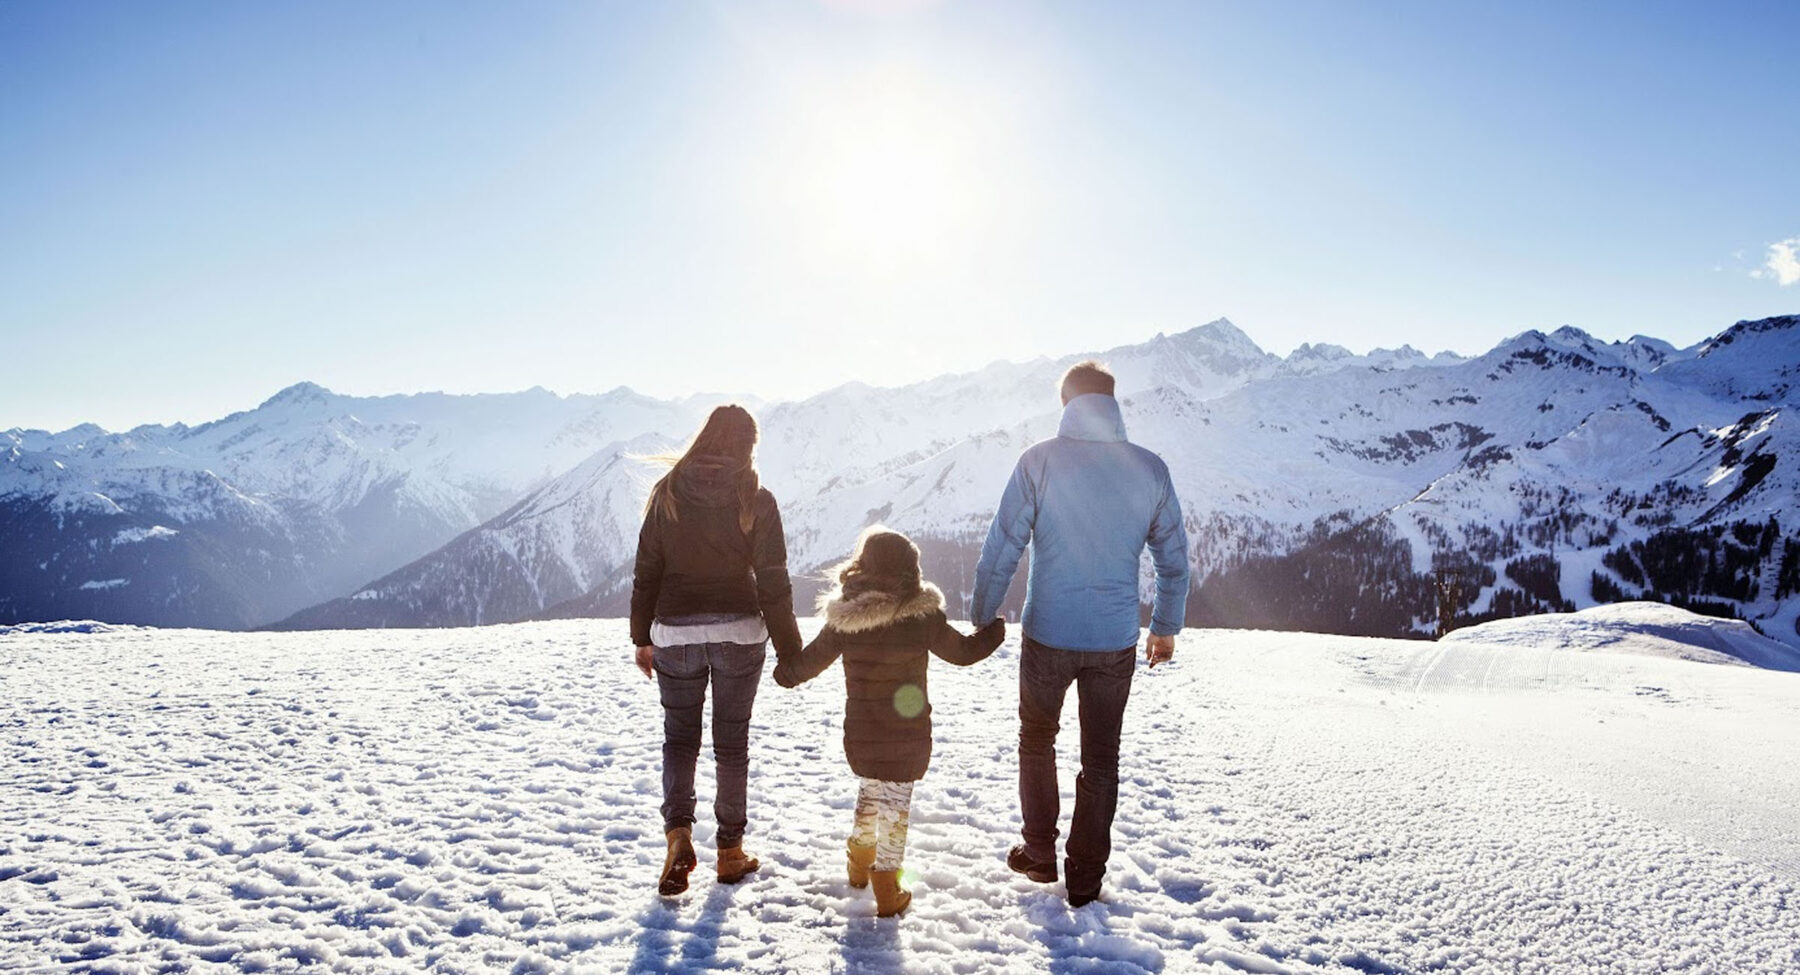 A family holding hands on a snowy mountain